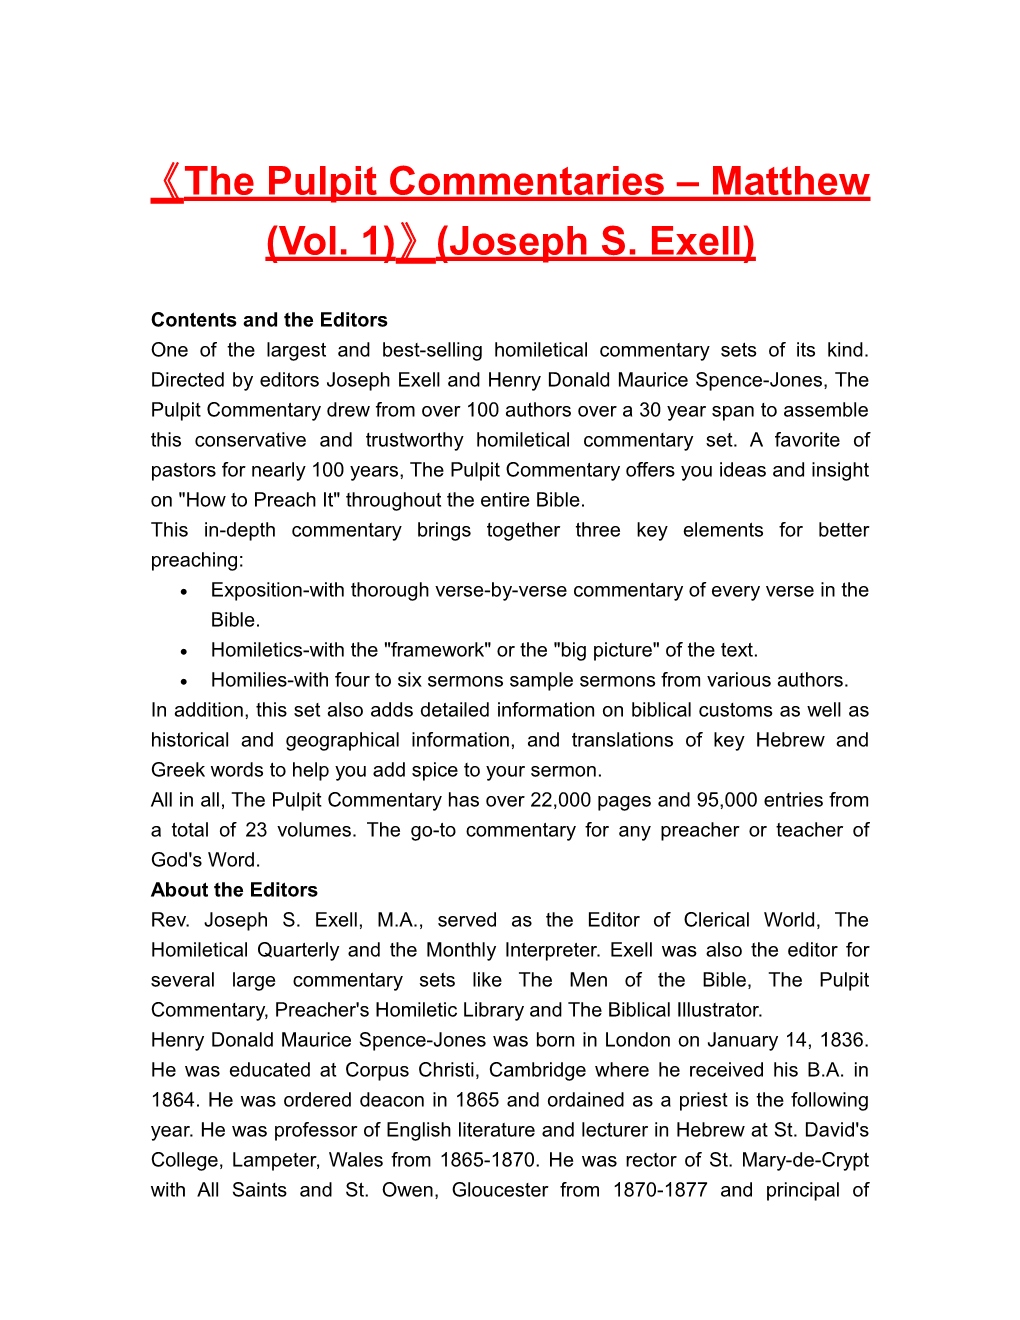 The Pulpit Commentaries Matthew (Vol. 1) (Joseph S. Exell)